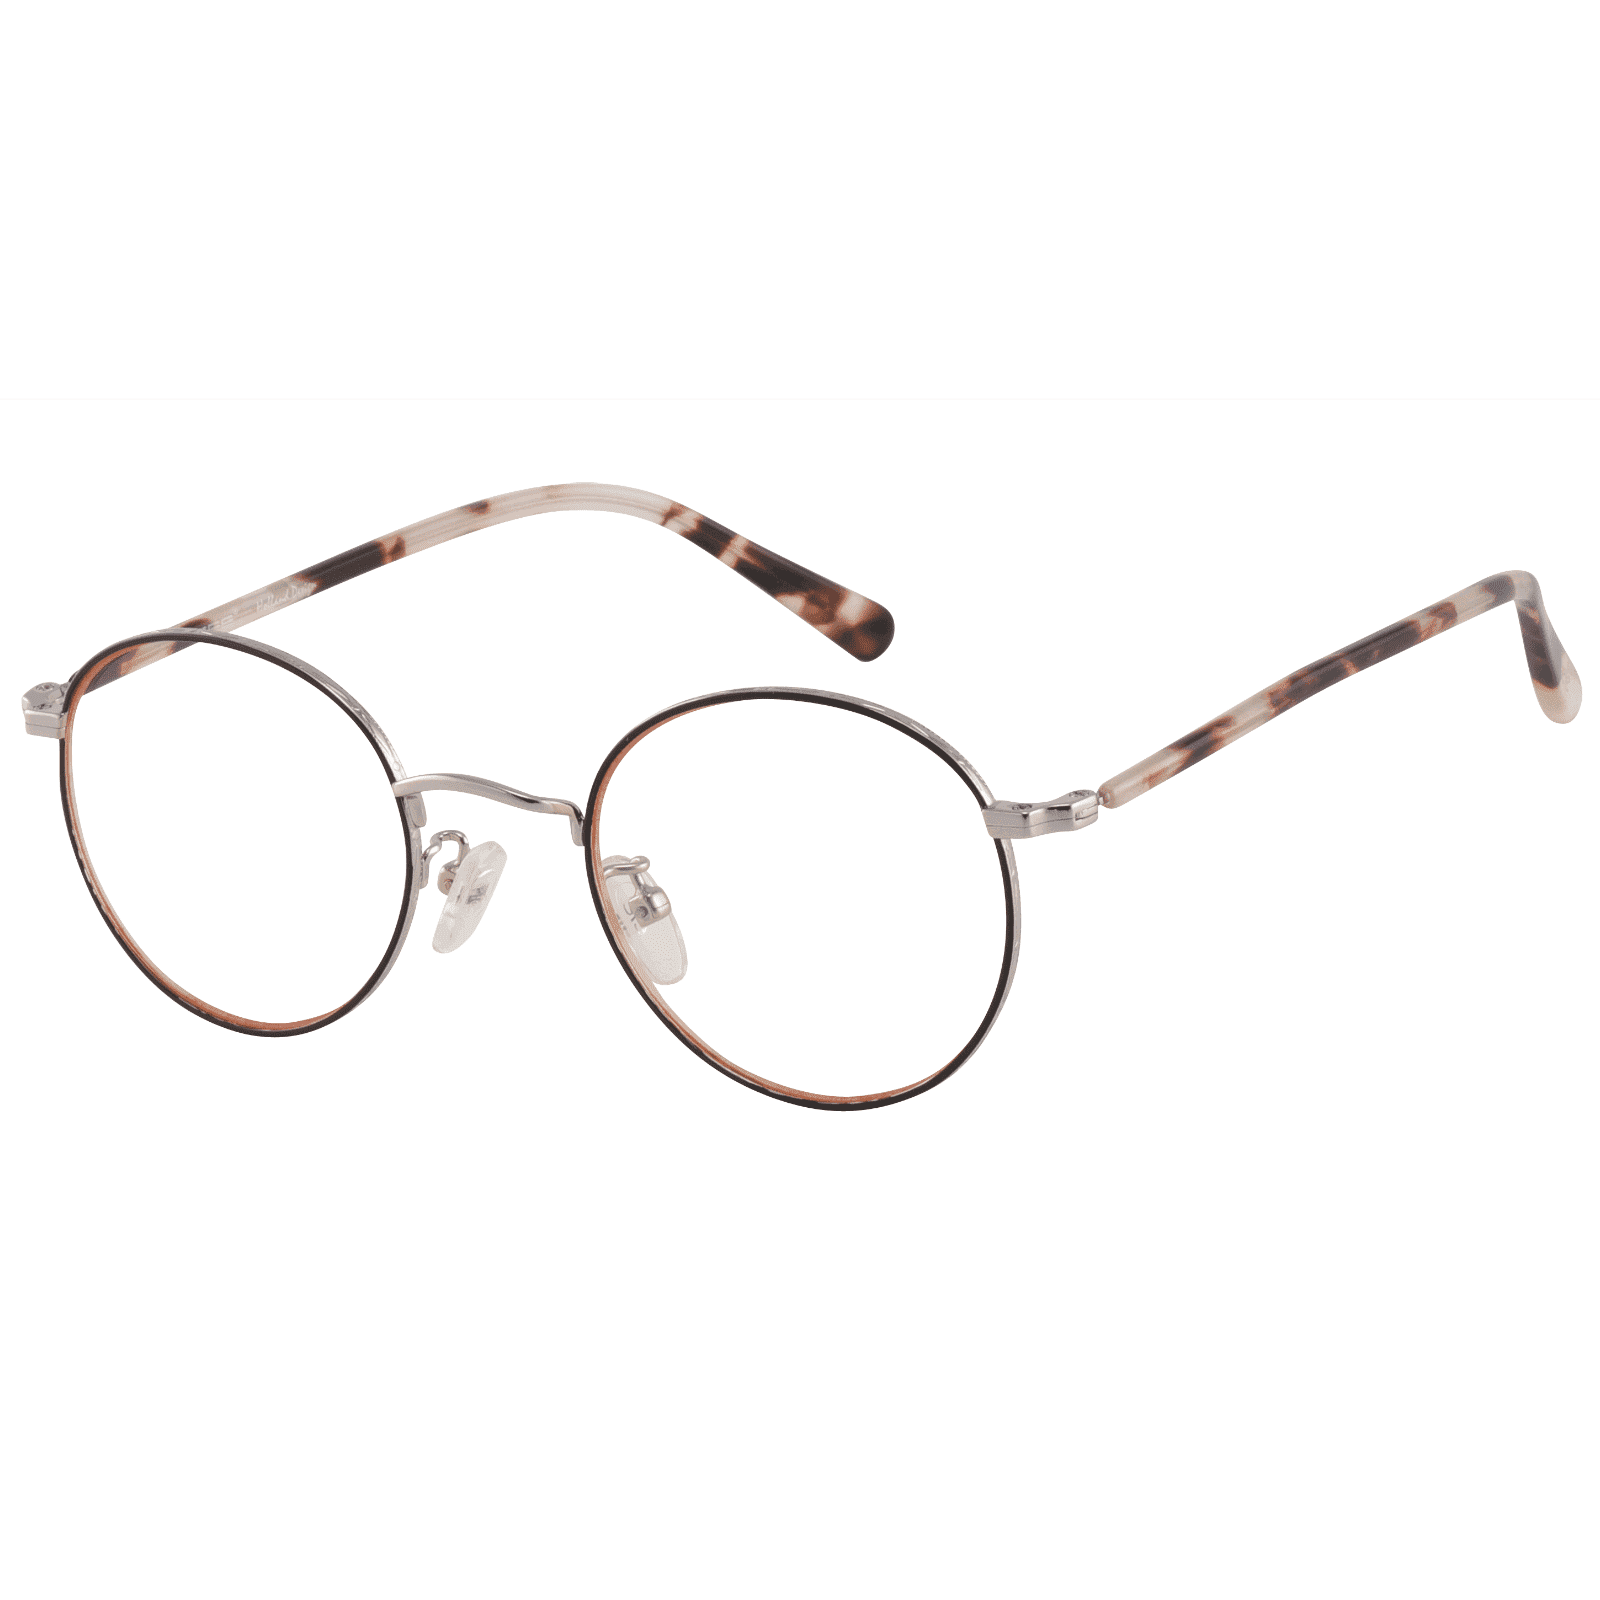 Bissi - Round Silver Reading Glasses for Women